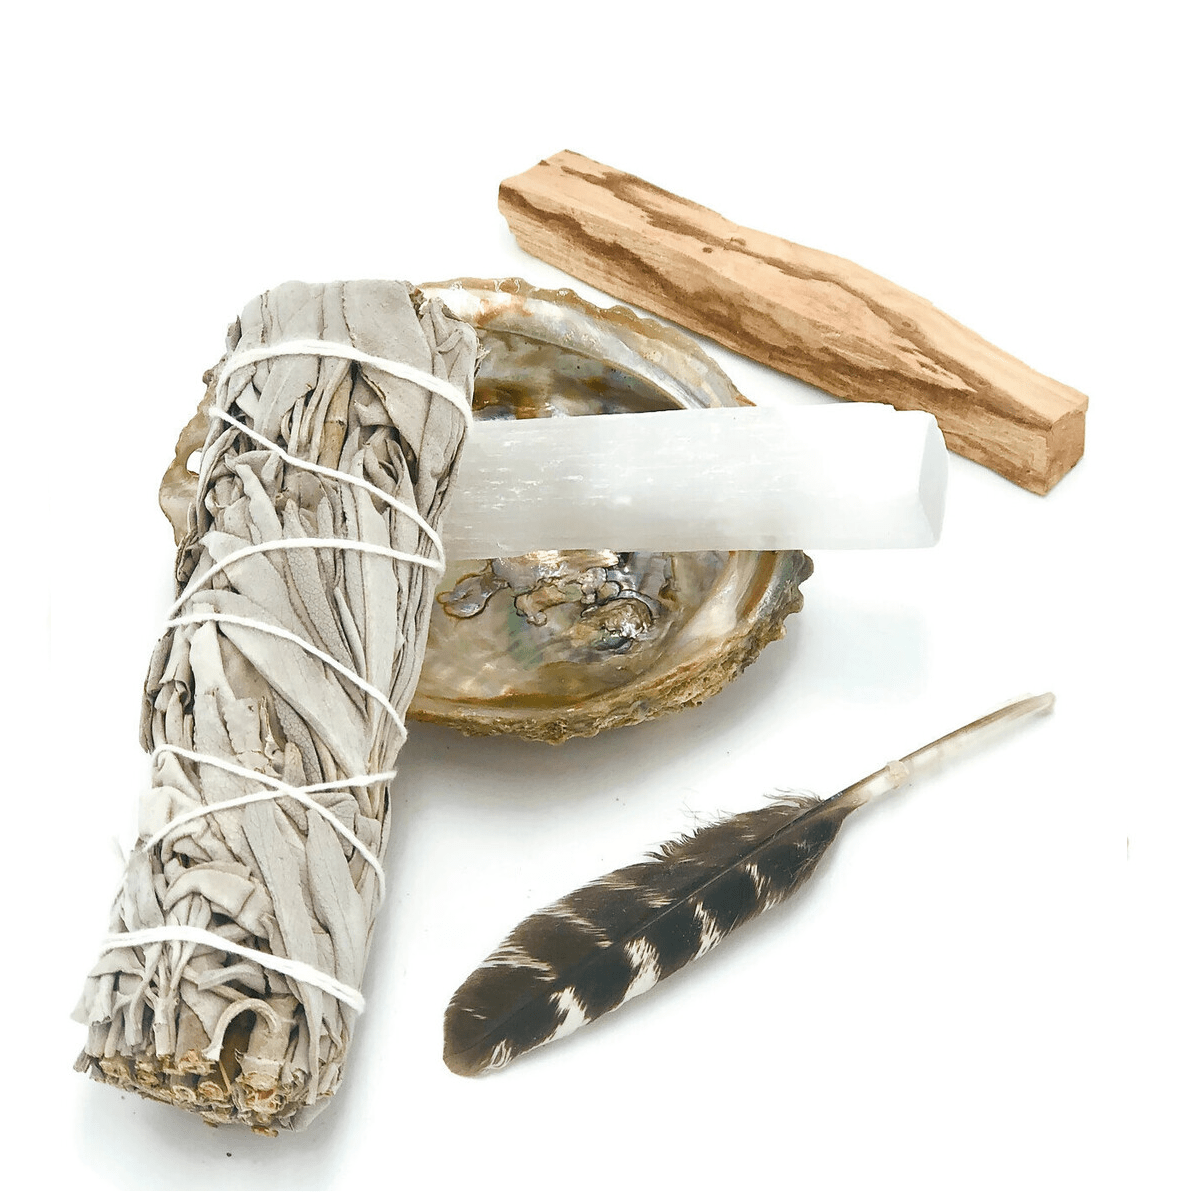 CLEARING SMUDGE KIT - Energy Wicks